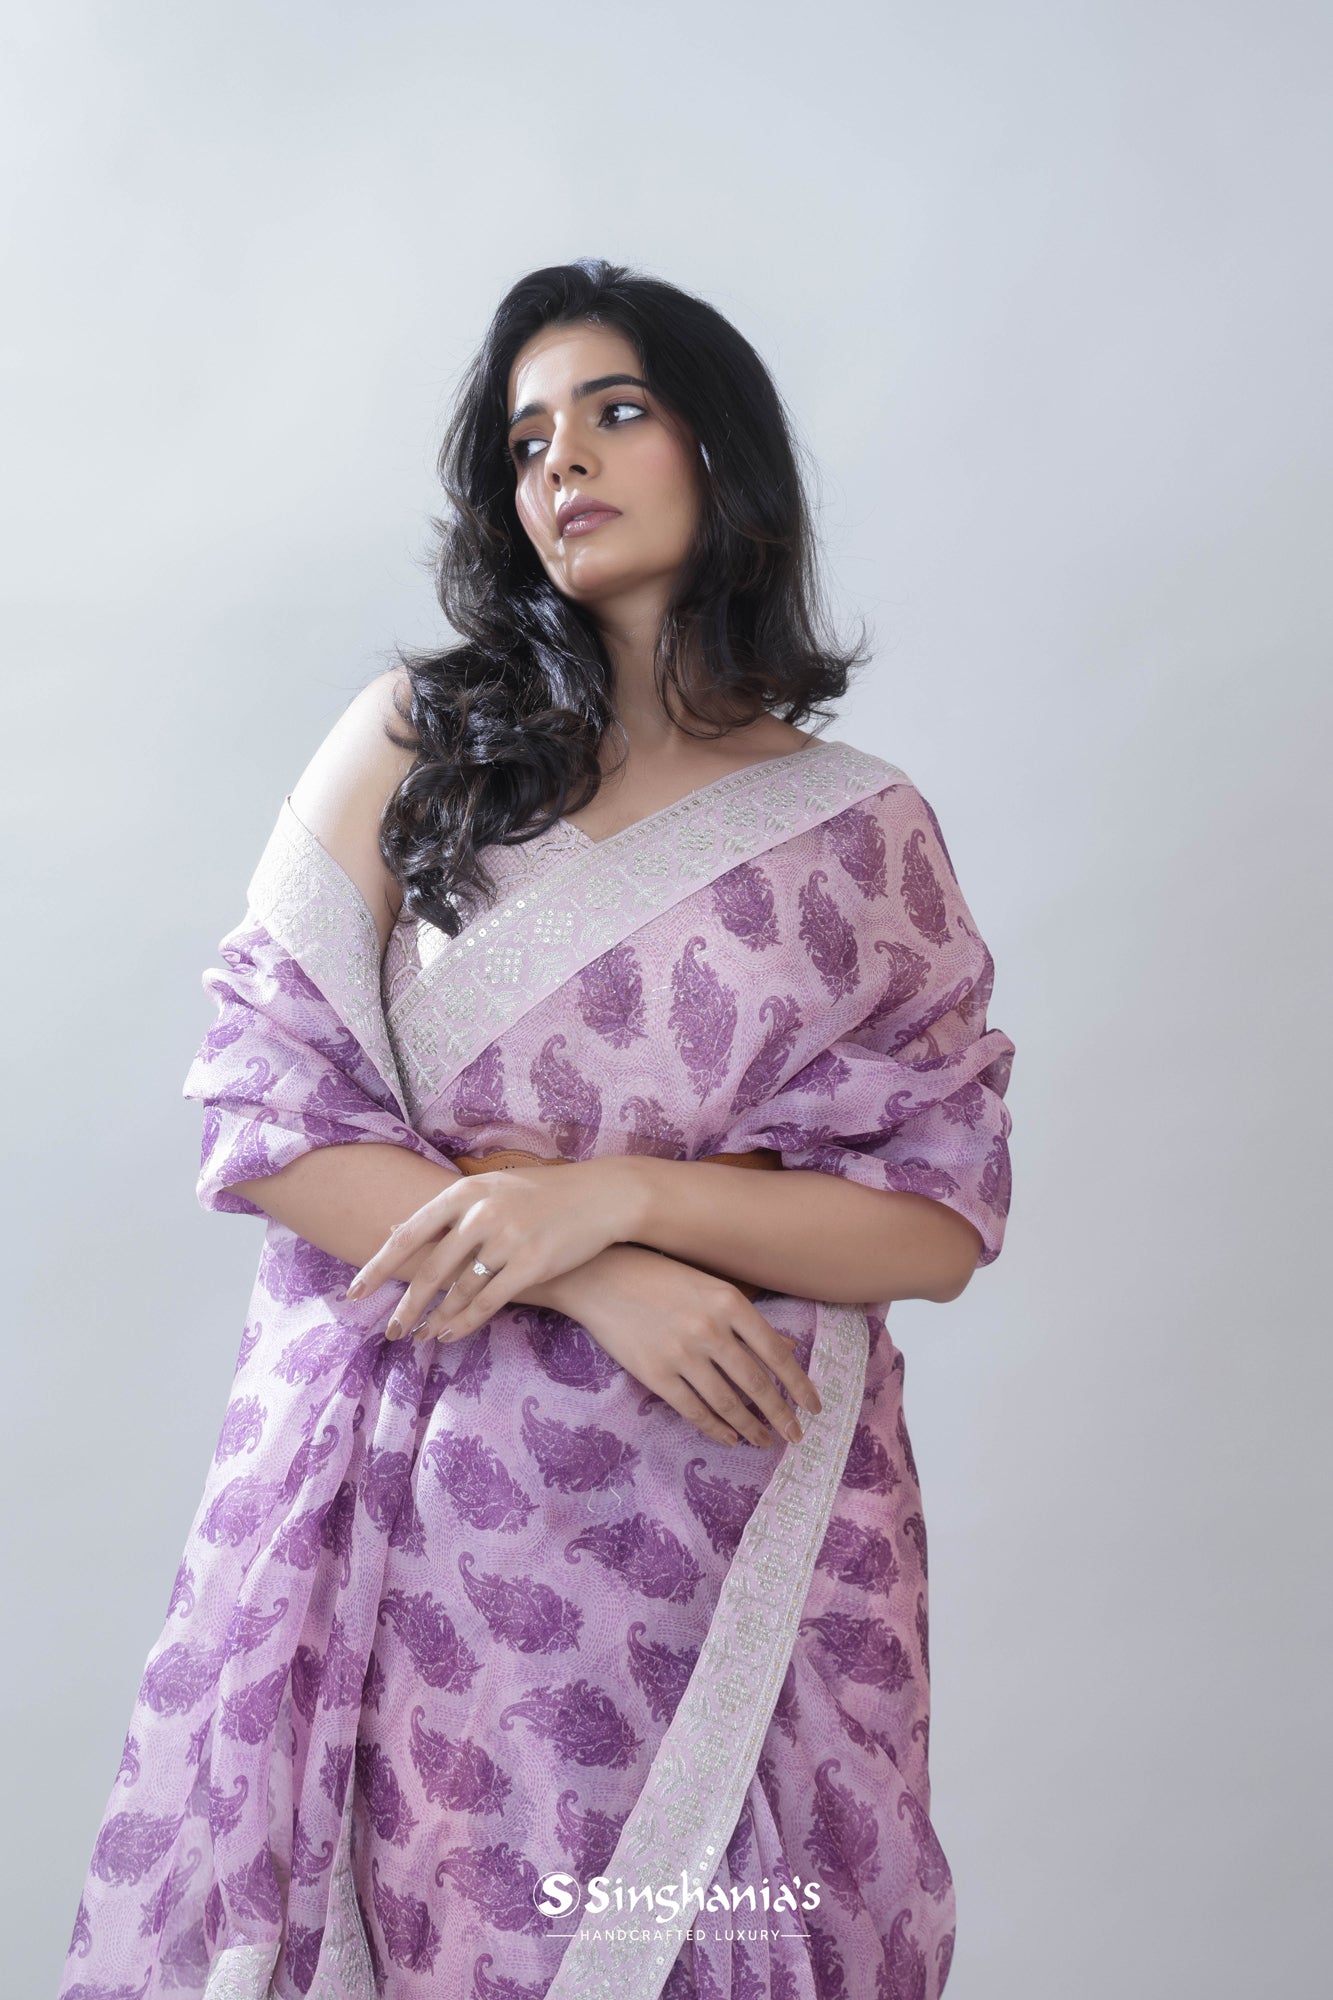 Faded Violet Printed Organza Saree With Floral Paisley Design